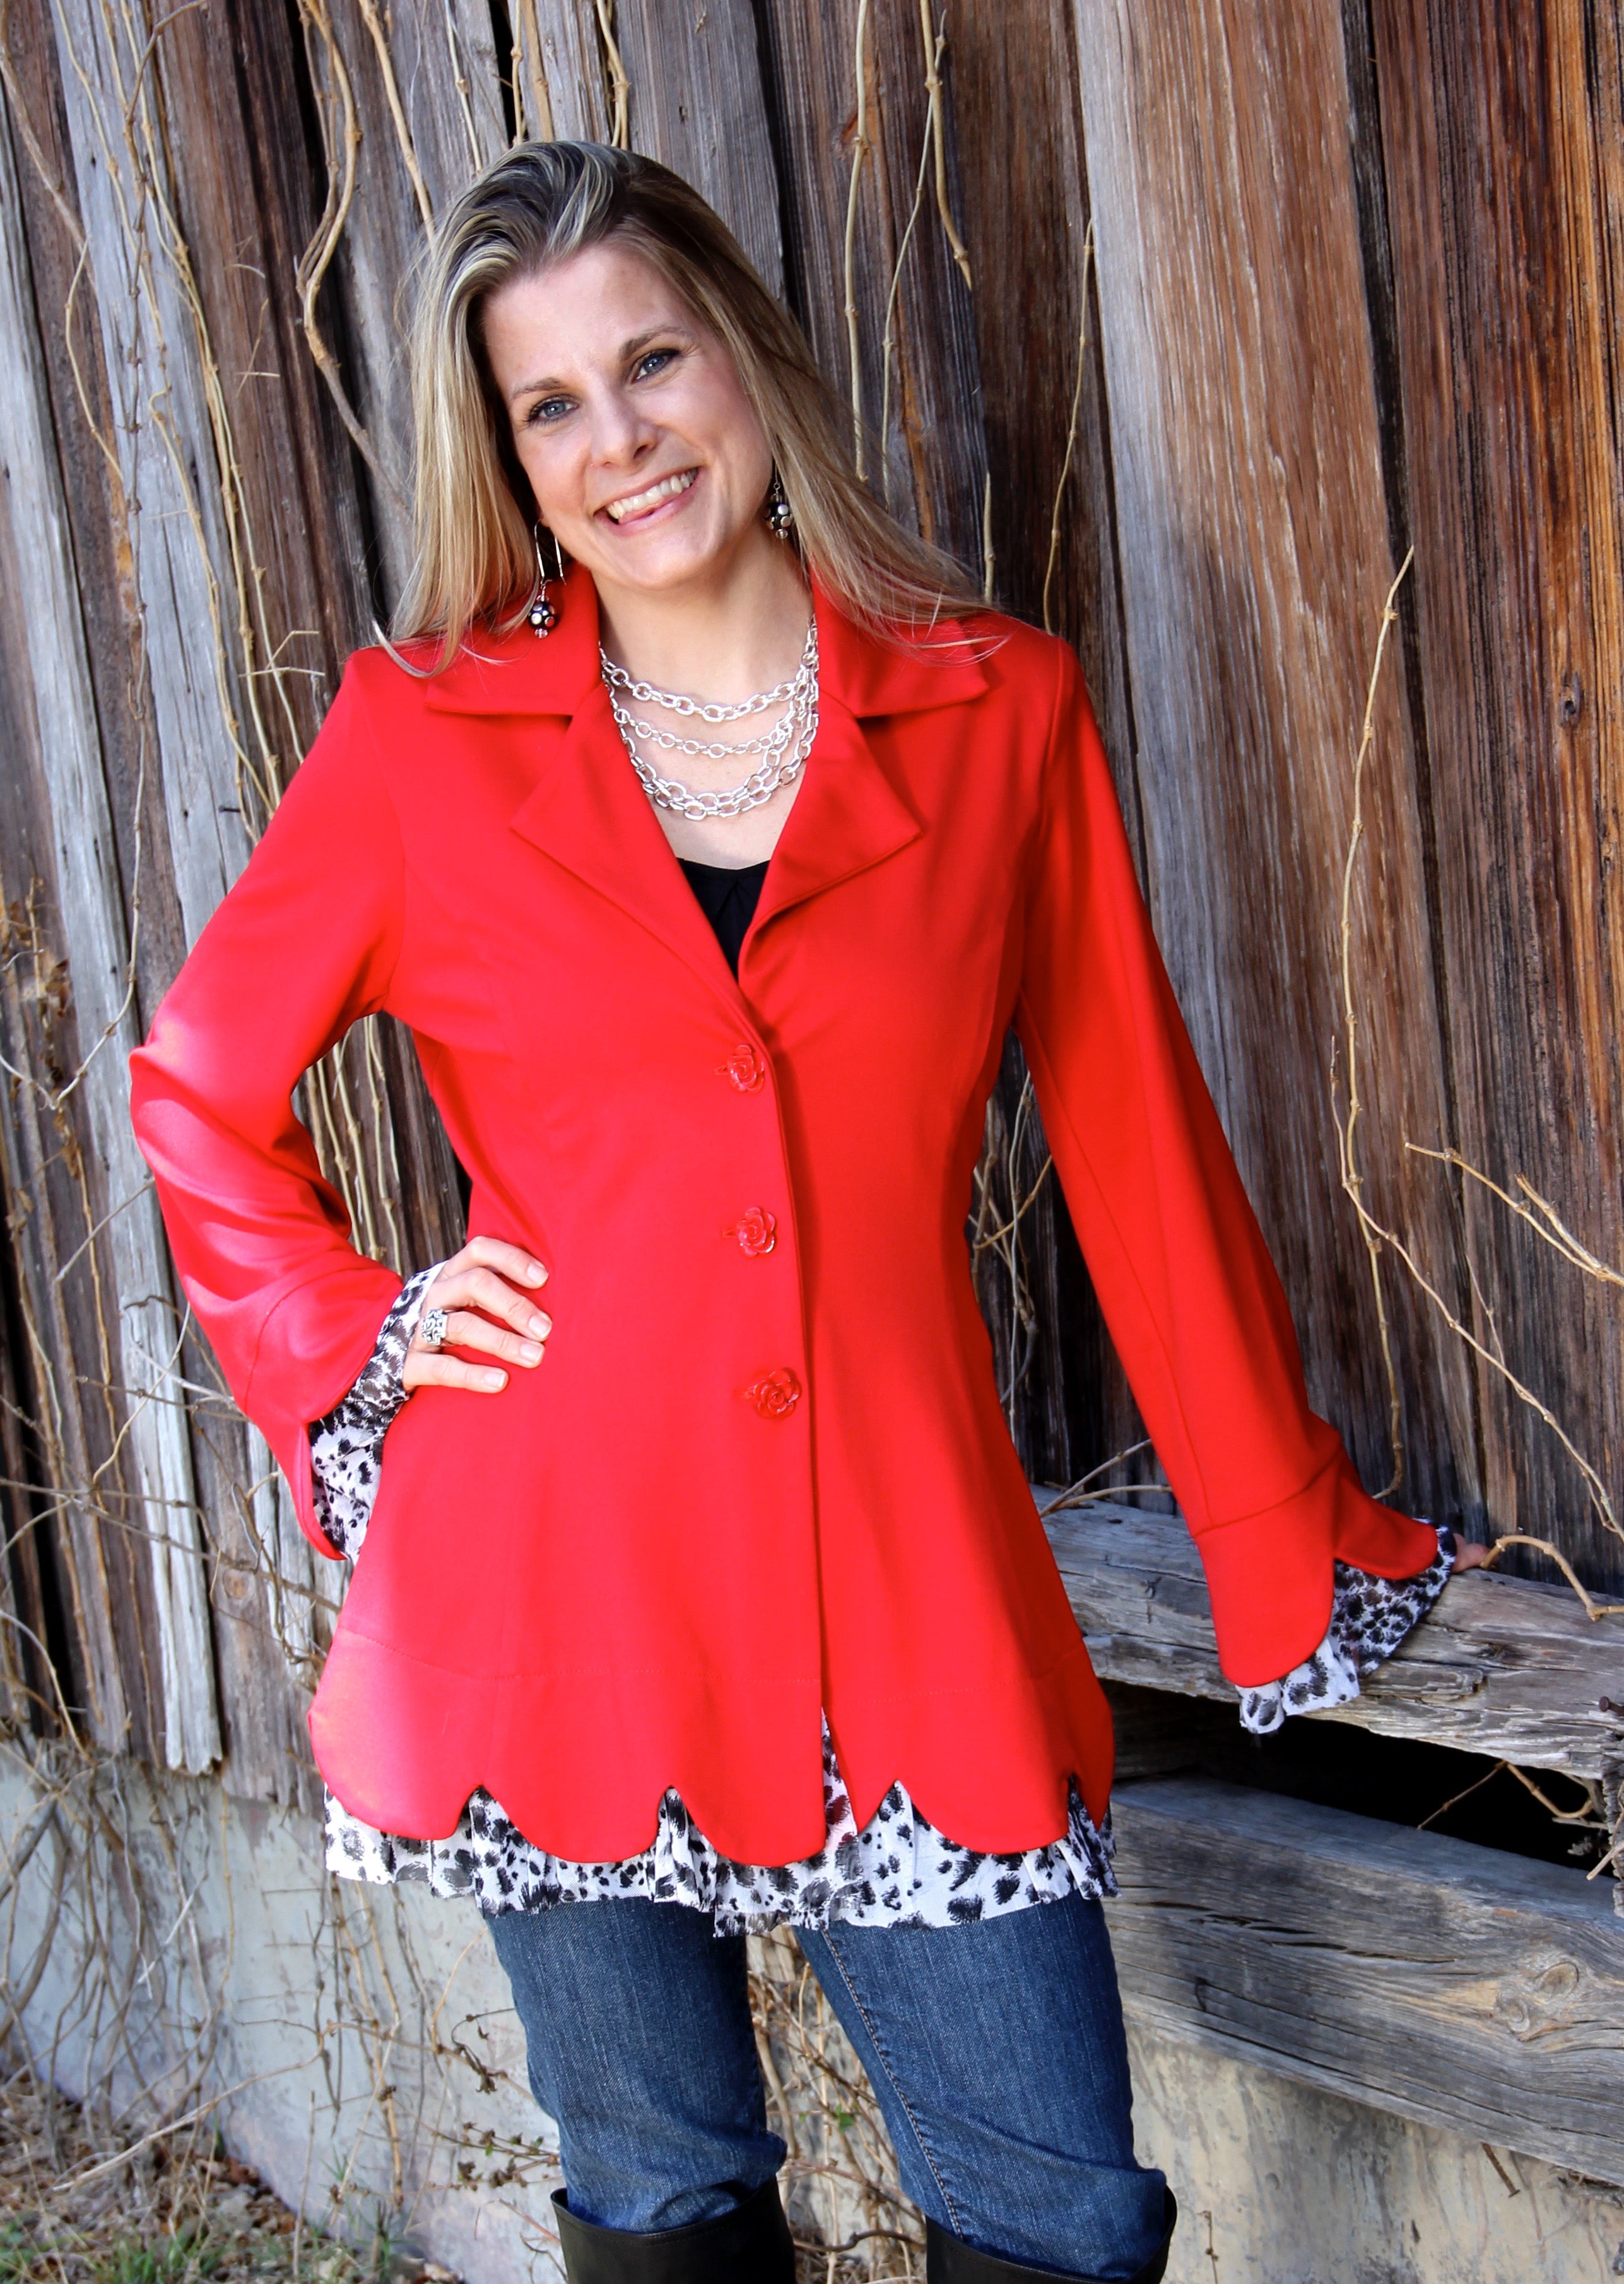 Knit Scallop Jacket - Front, in Red color